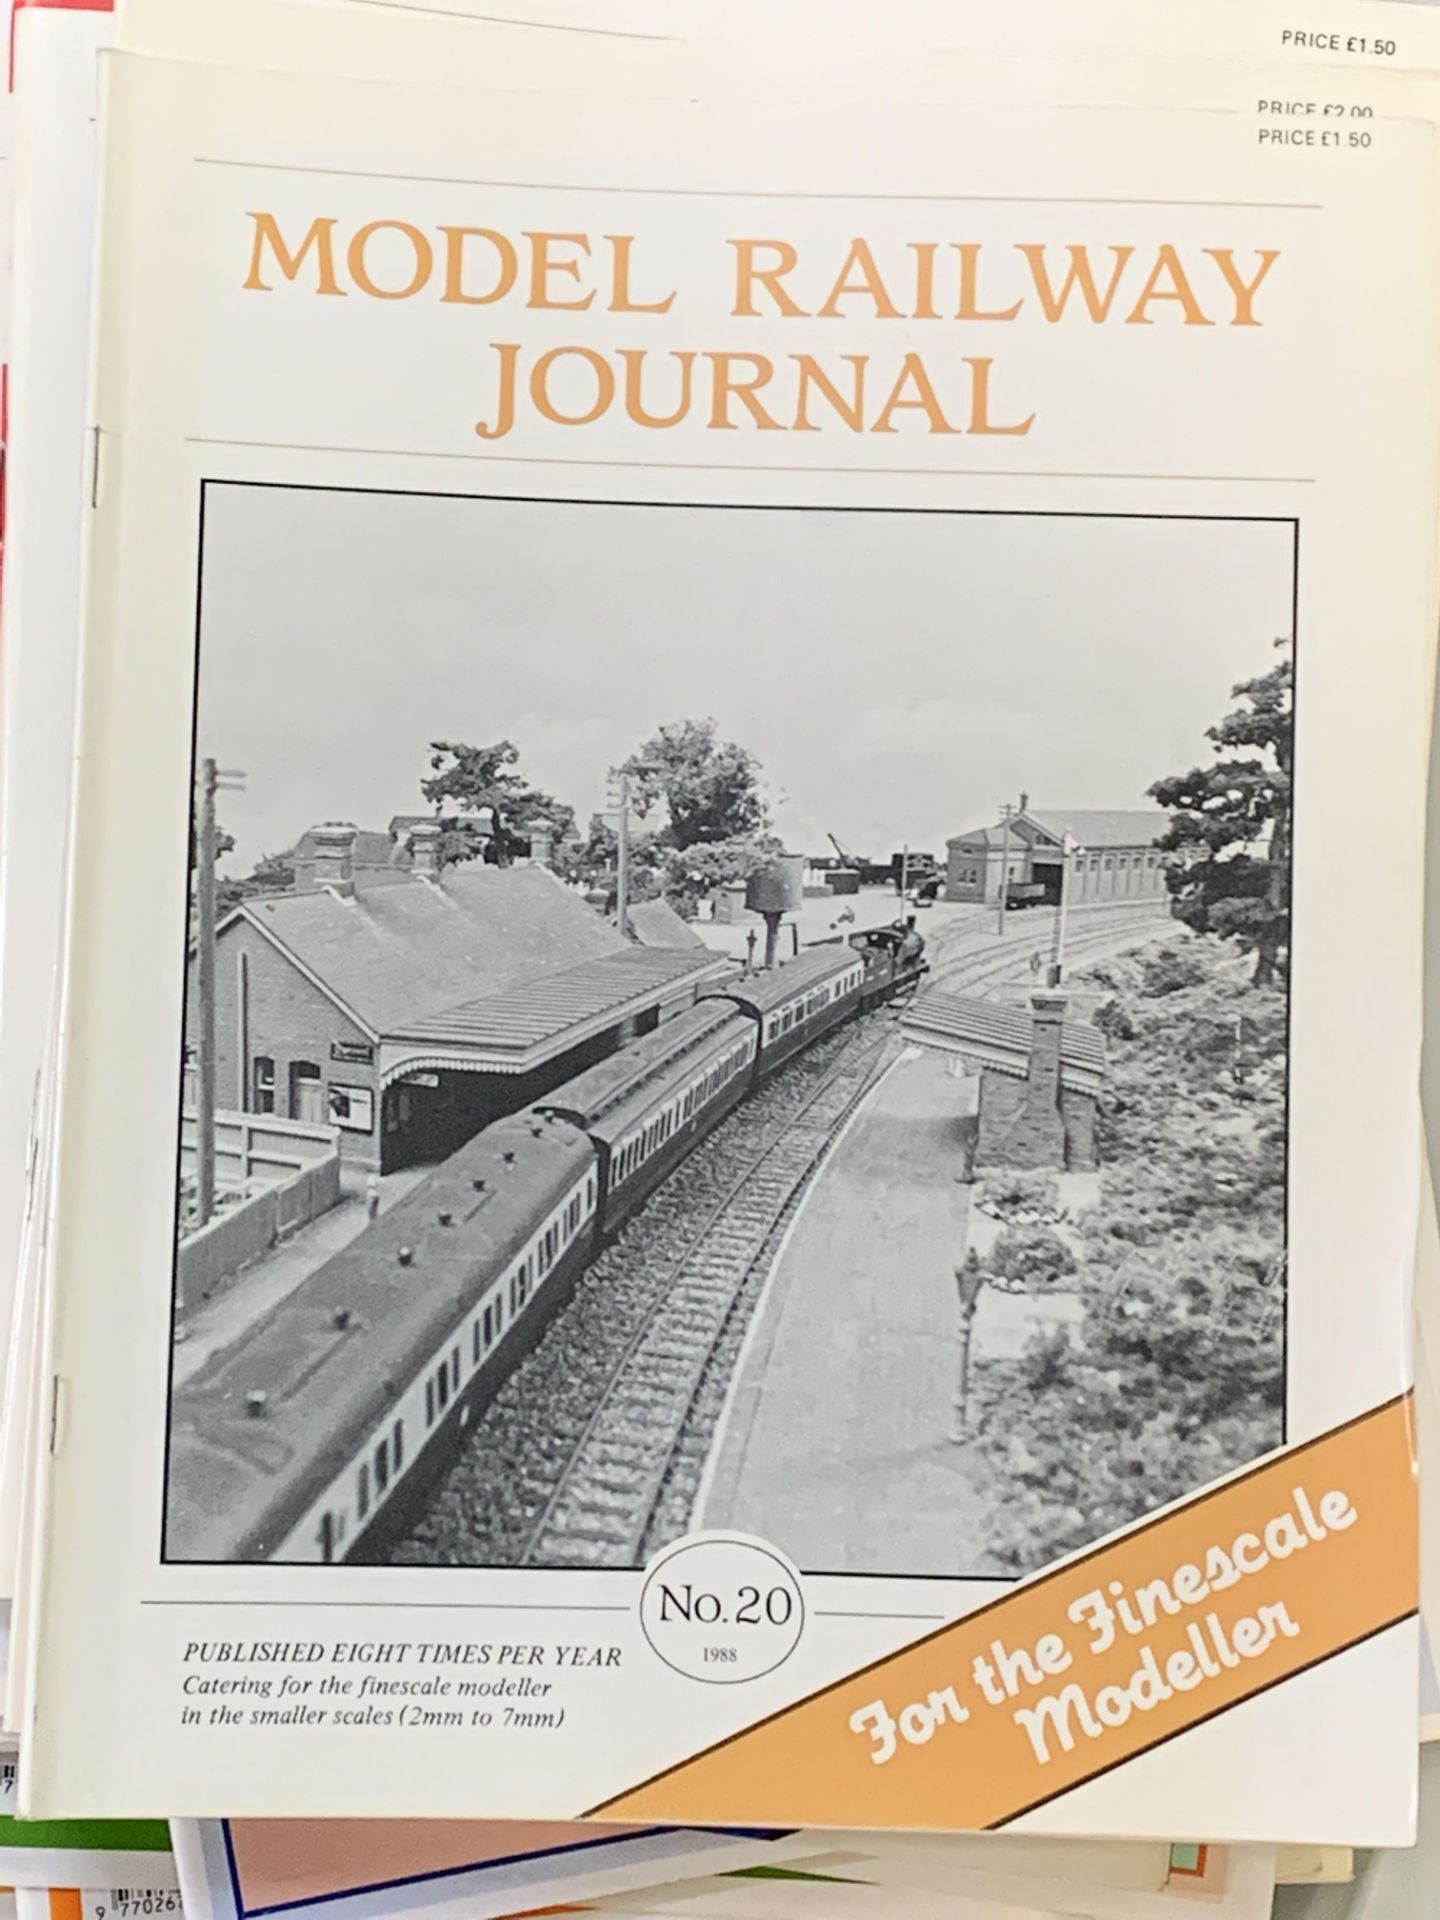 Large quantity of Model Railway Journal - Image 2 of 2